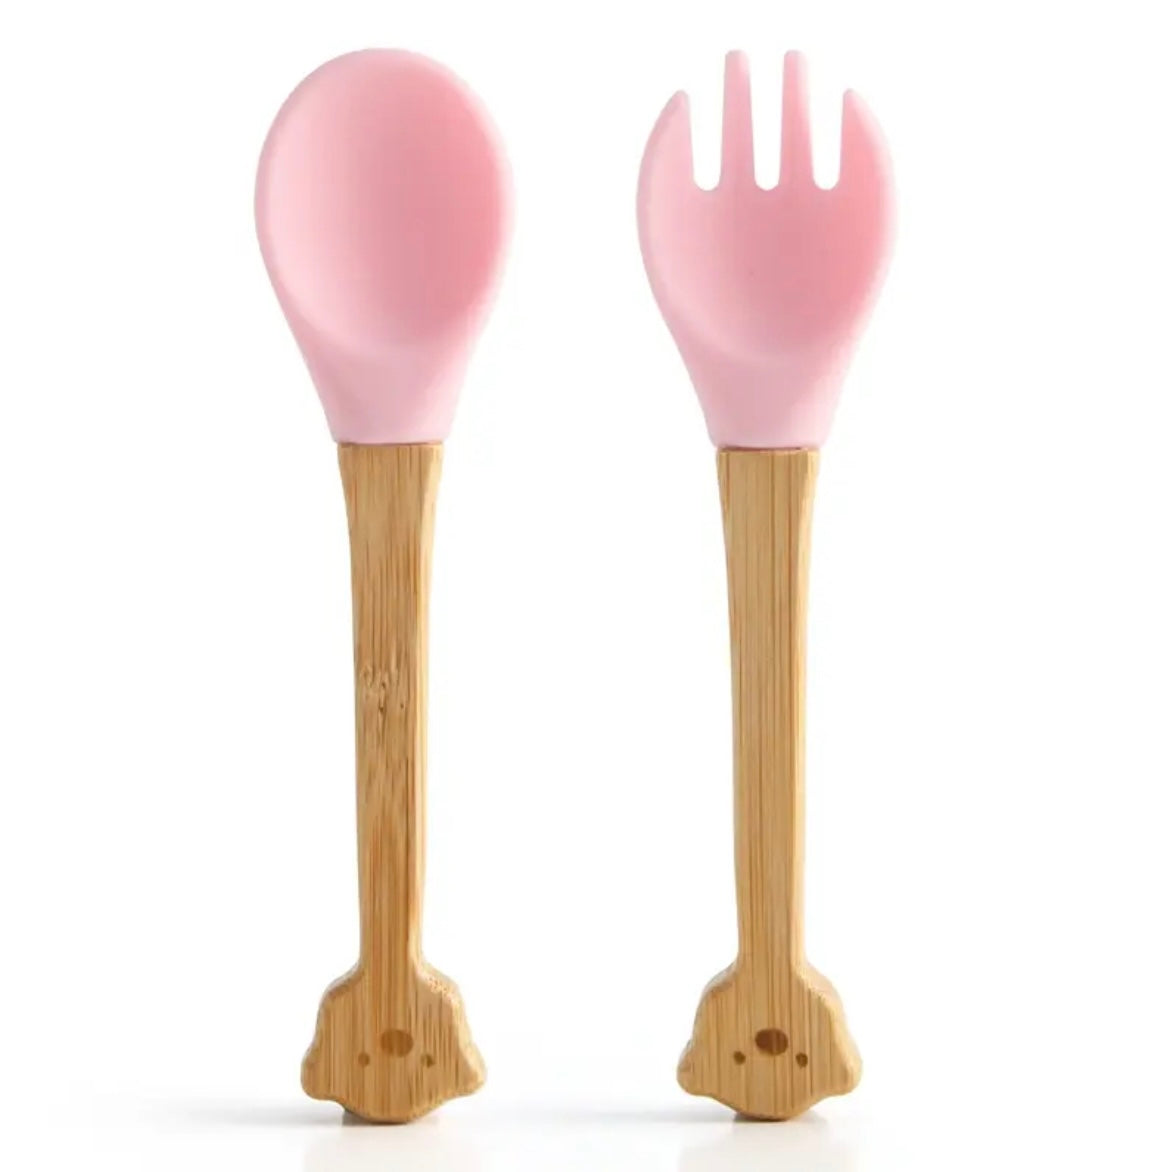 Baby Fork & Spoon Set Pink Teddy, shop the best gift gifts for her for him from Inna carton online store dubai, UAE!